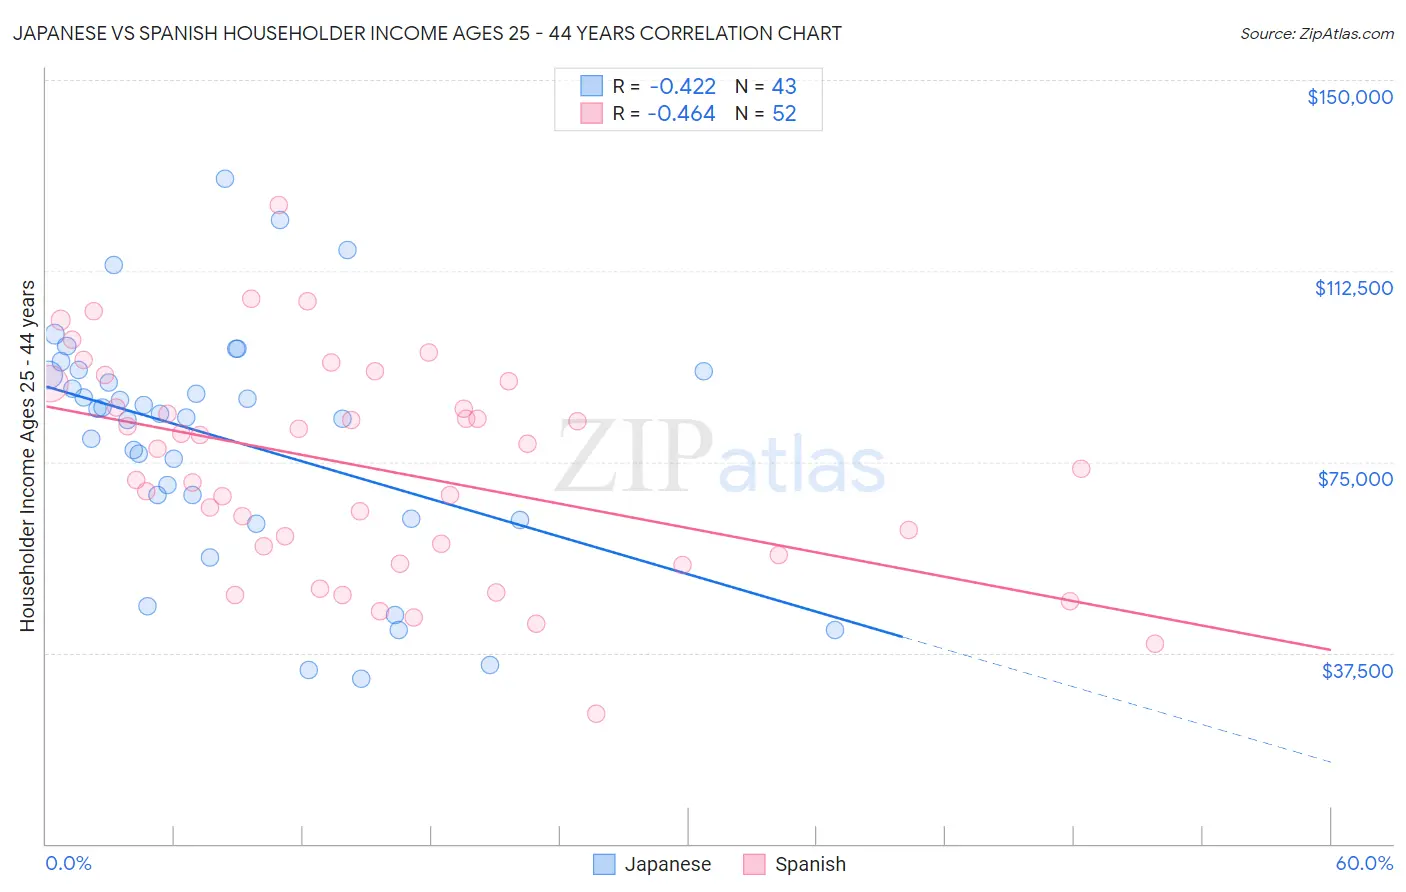 Japanese vs Spanish Householder Income Ages 25 - 44 years